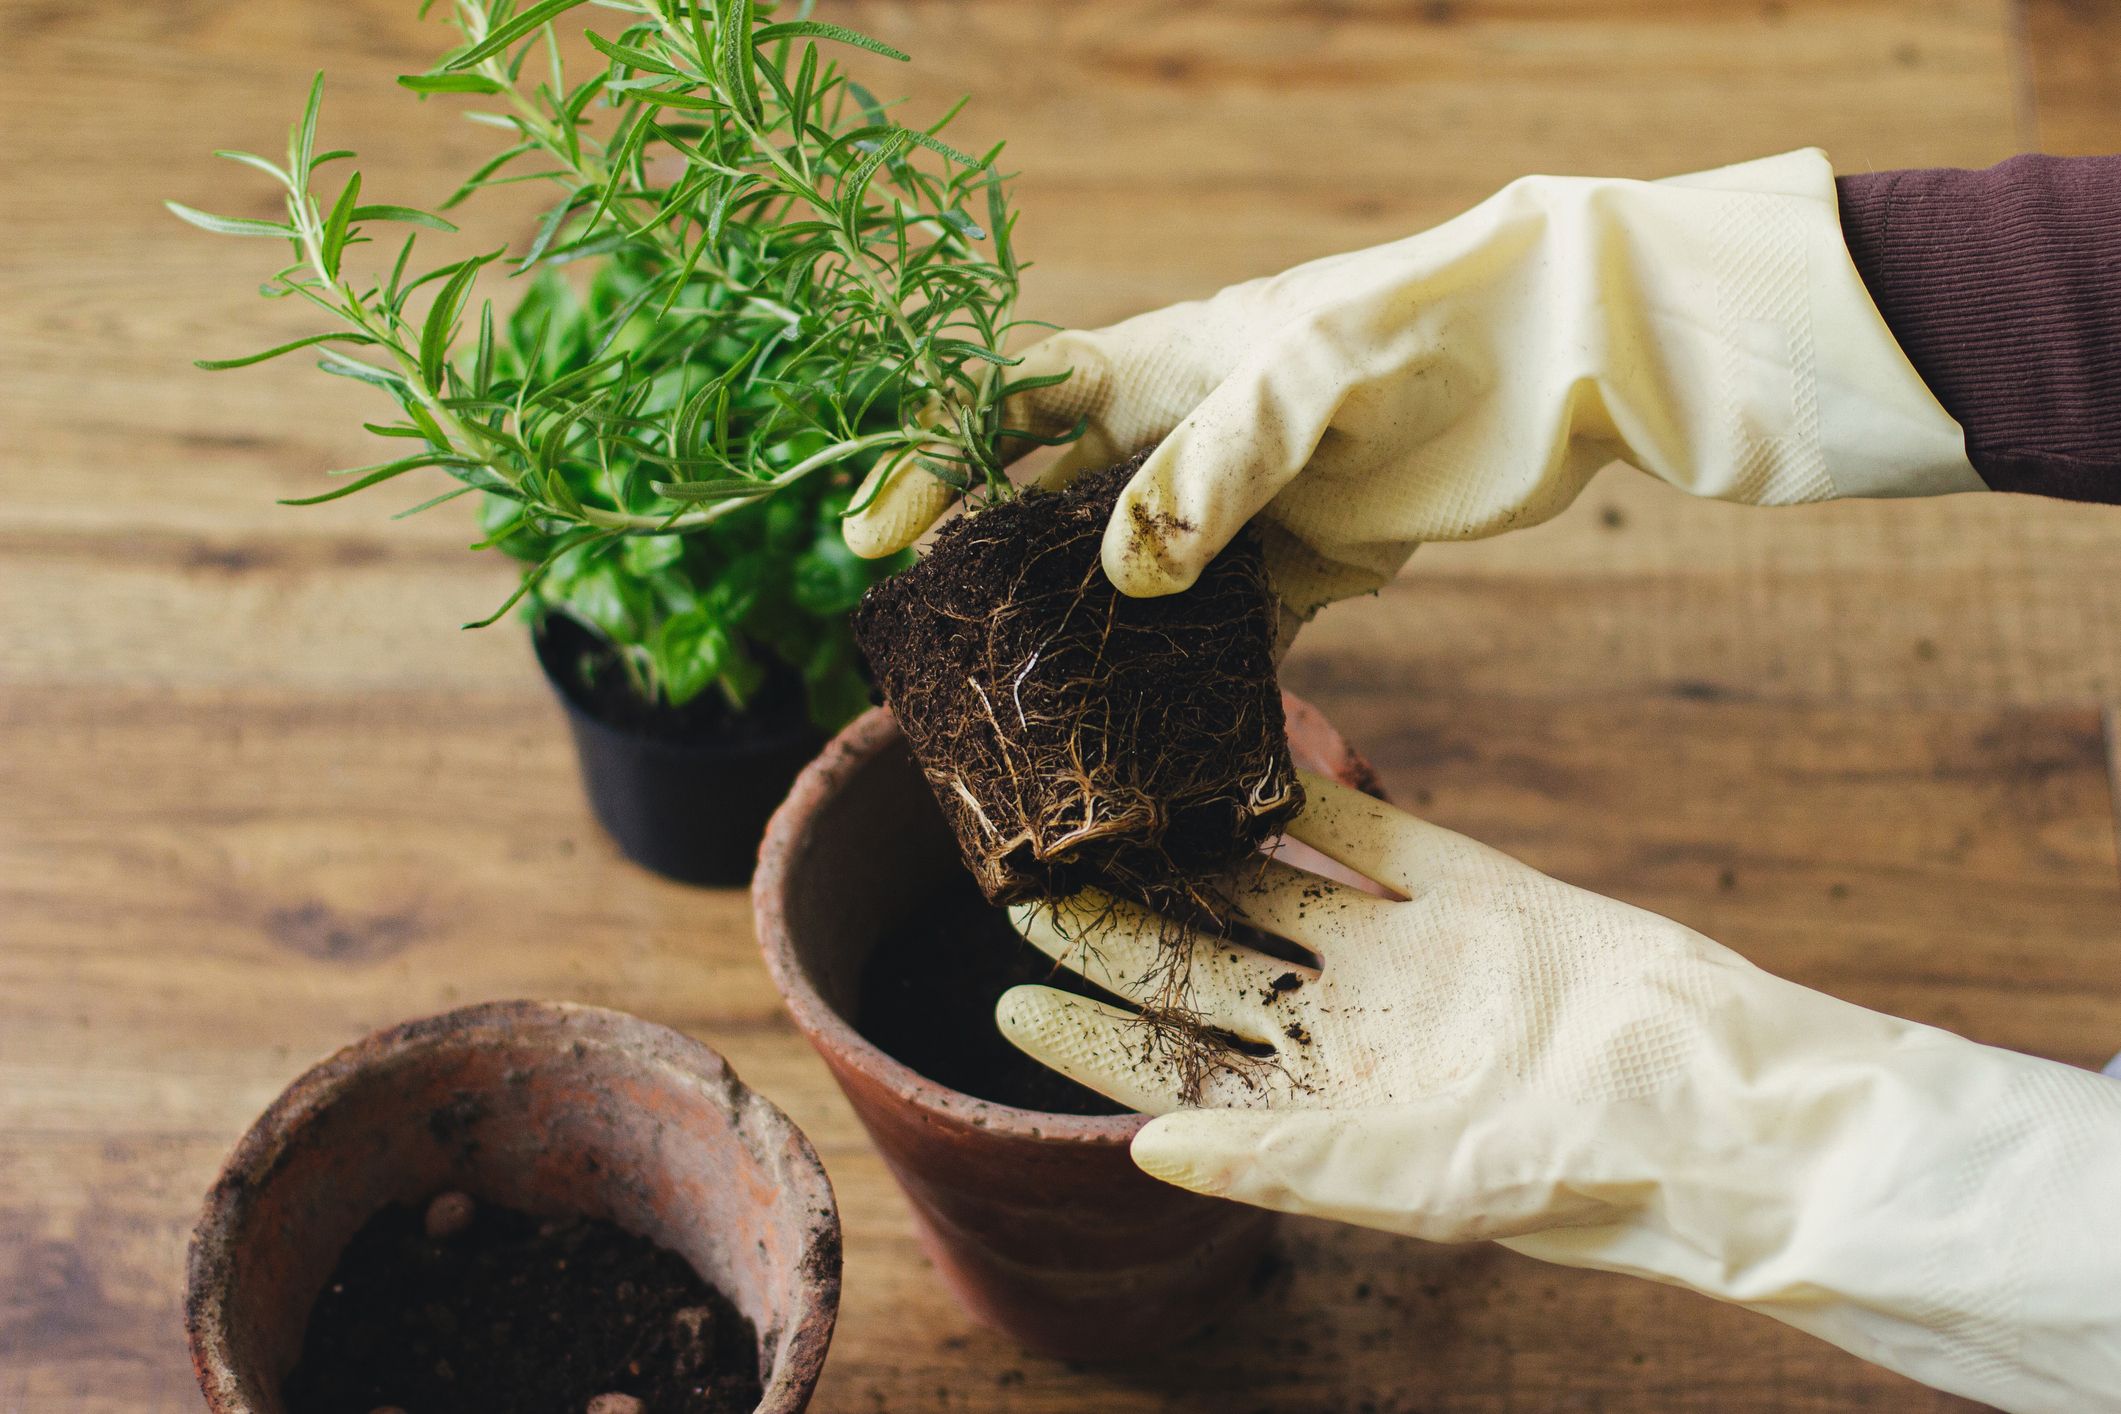 How to Repot Plants: Easy Steps for Repotting Indoor Plants